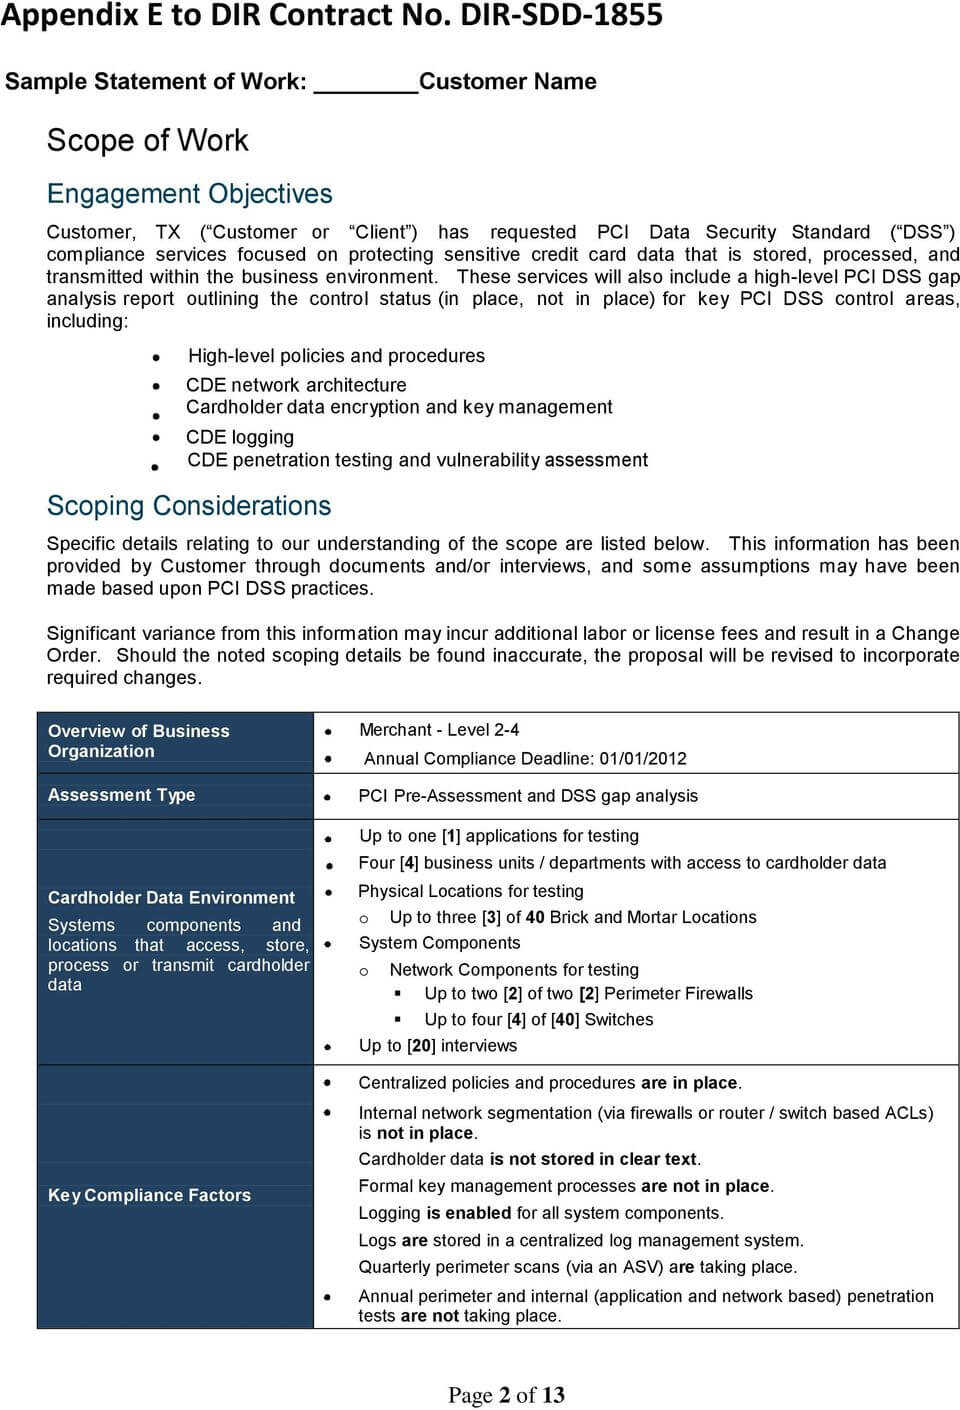 Sample Statement Of Work - Pdf Free Download Intended For Pci Dss Gap Analysis Report Template